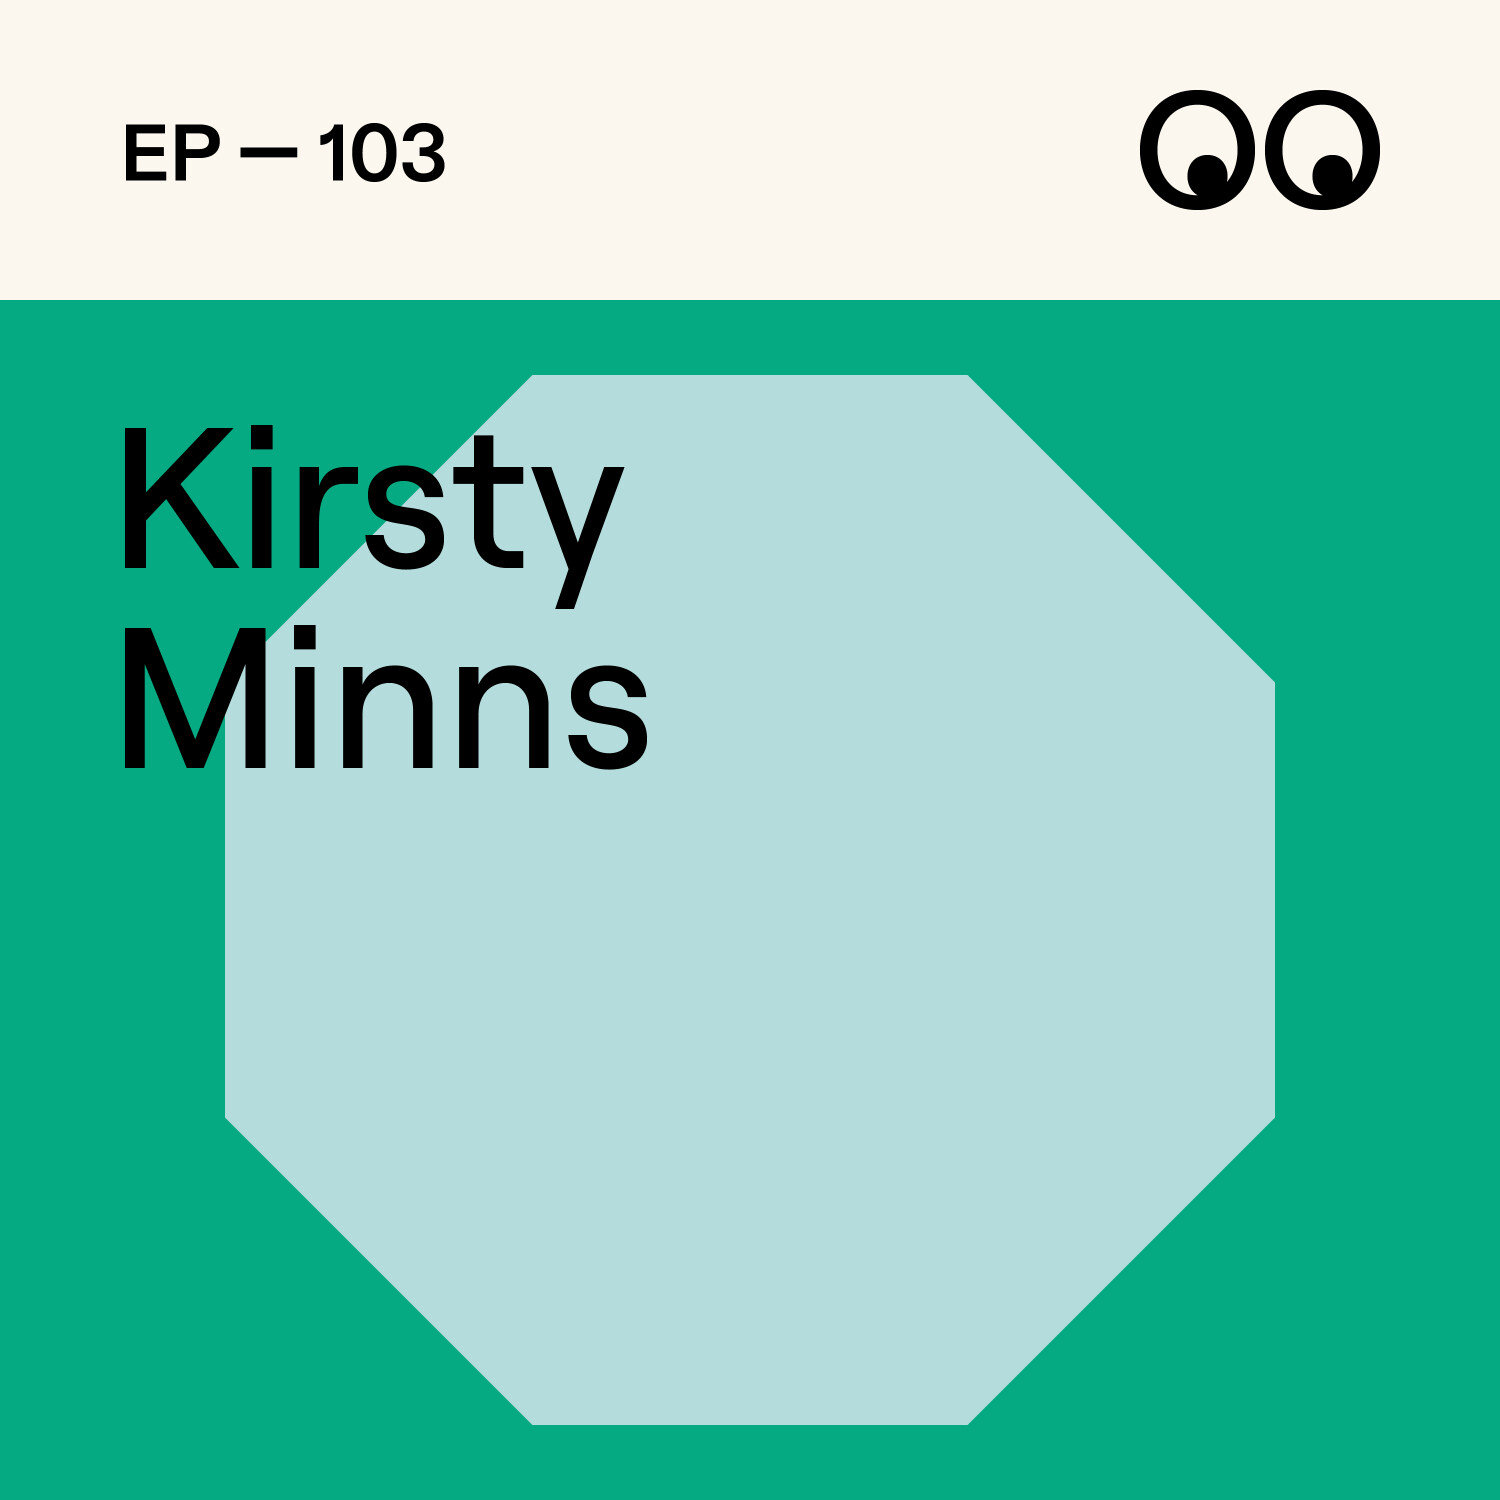 Finding purpose and meaning in our creative work, with Kirsty Minns